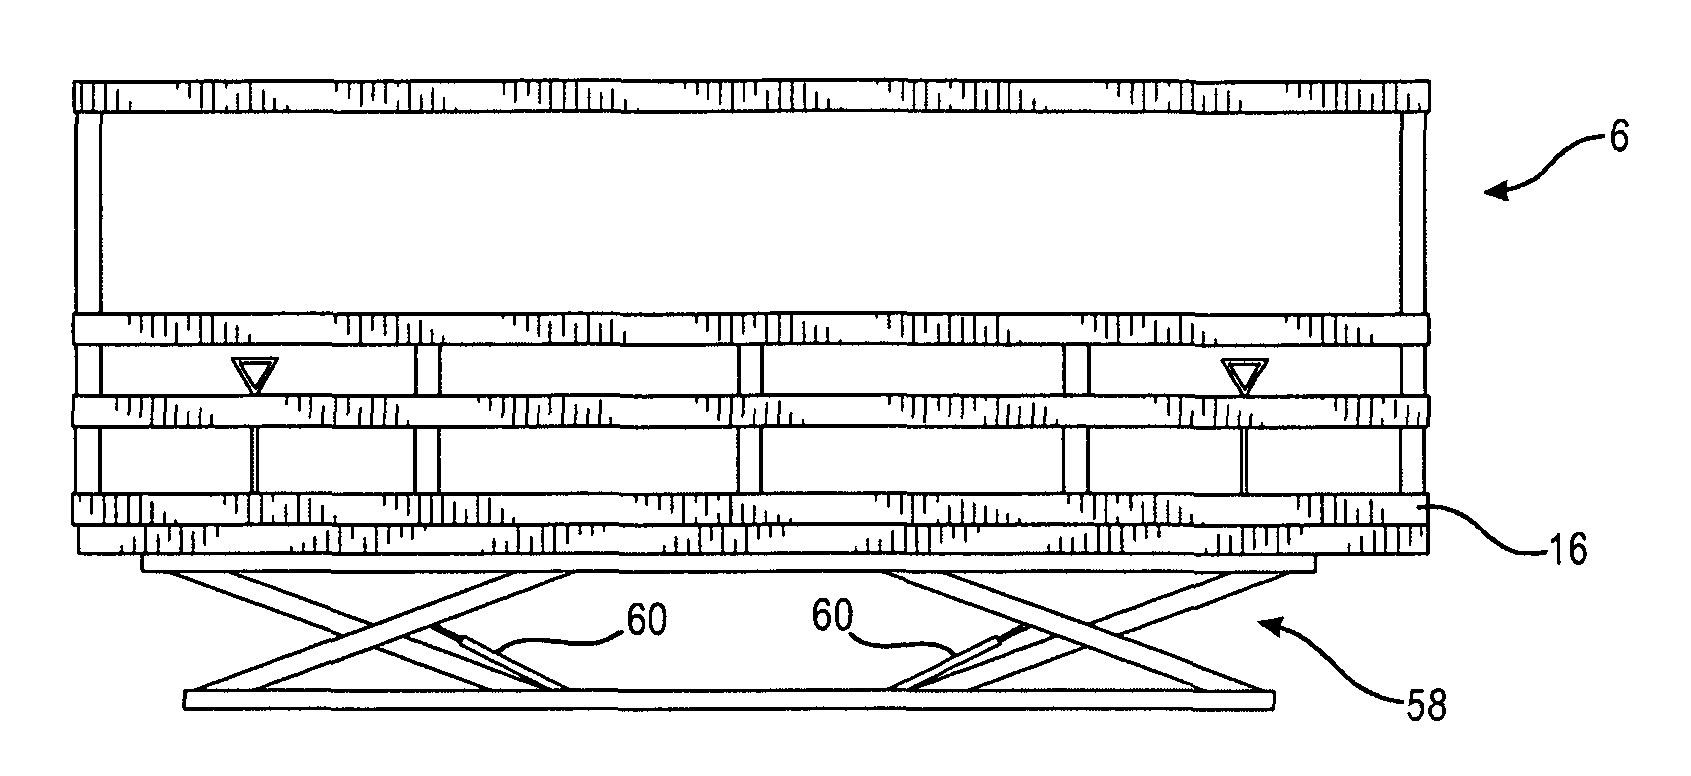 Flat railcar work platform and wheel assembly with locking mechanism